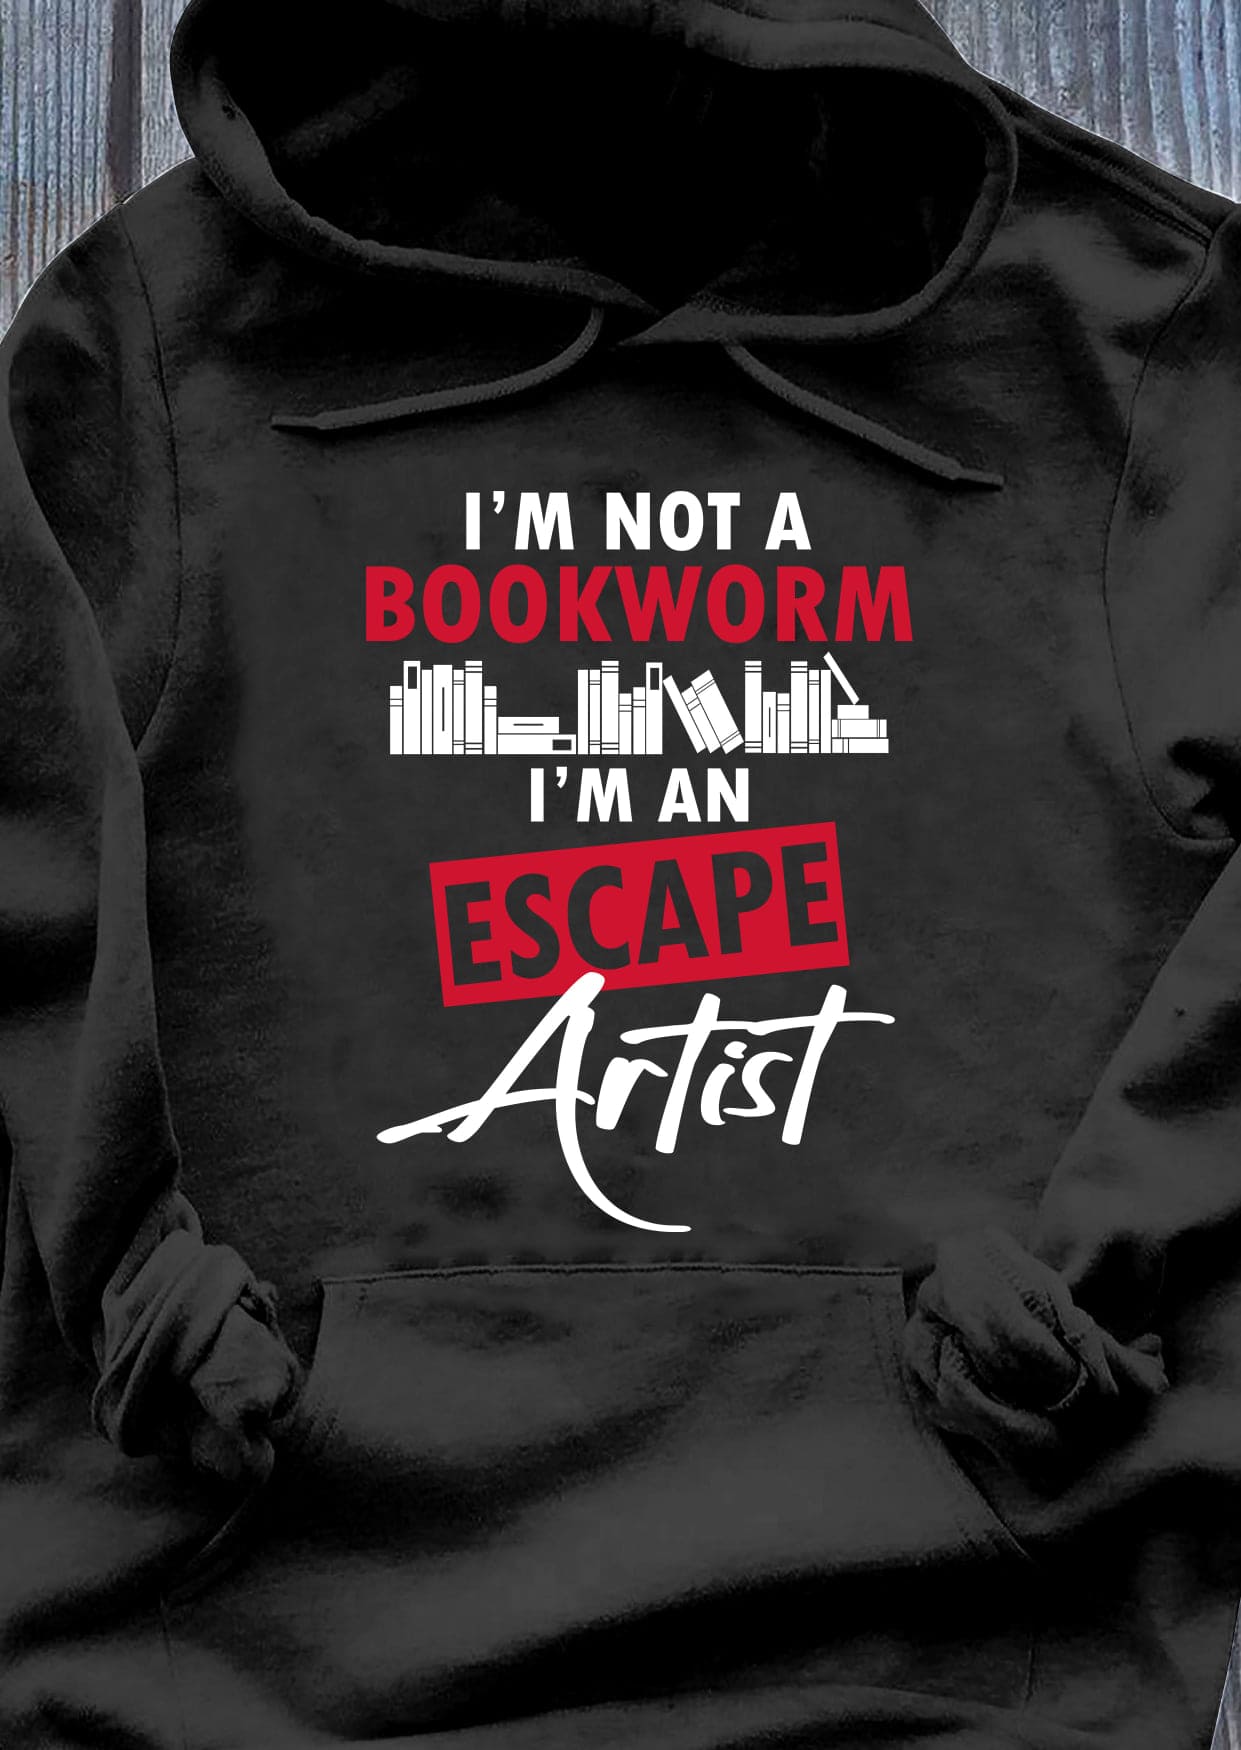 I'm not an bookworm I'm an escape artist - Gift for bookaholic